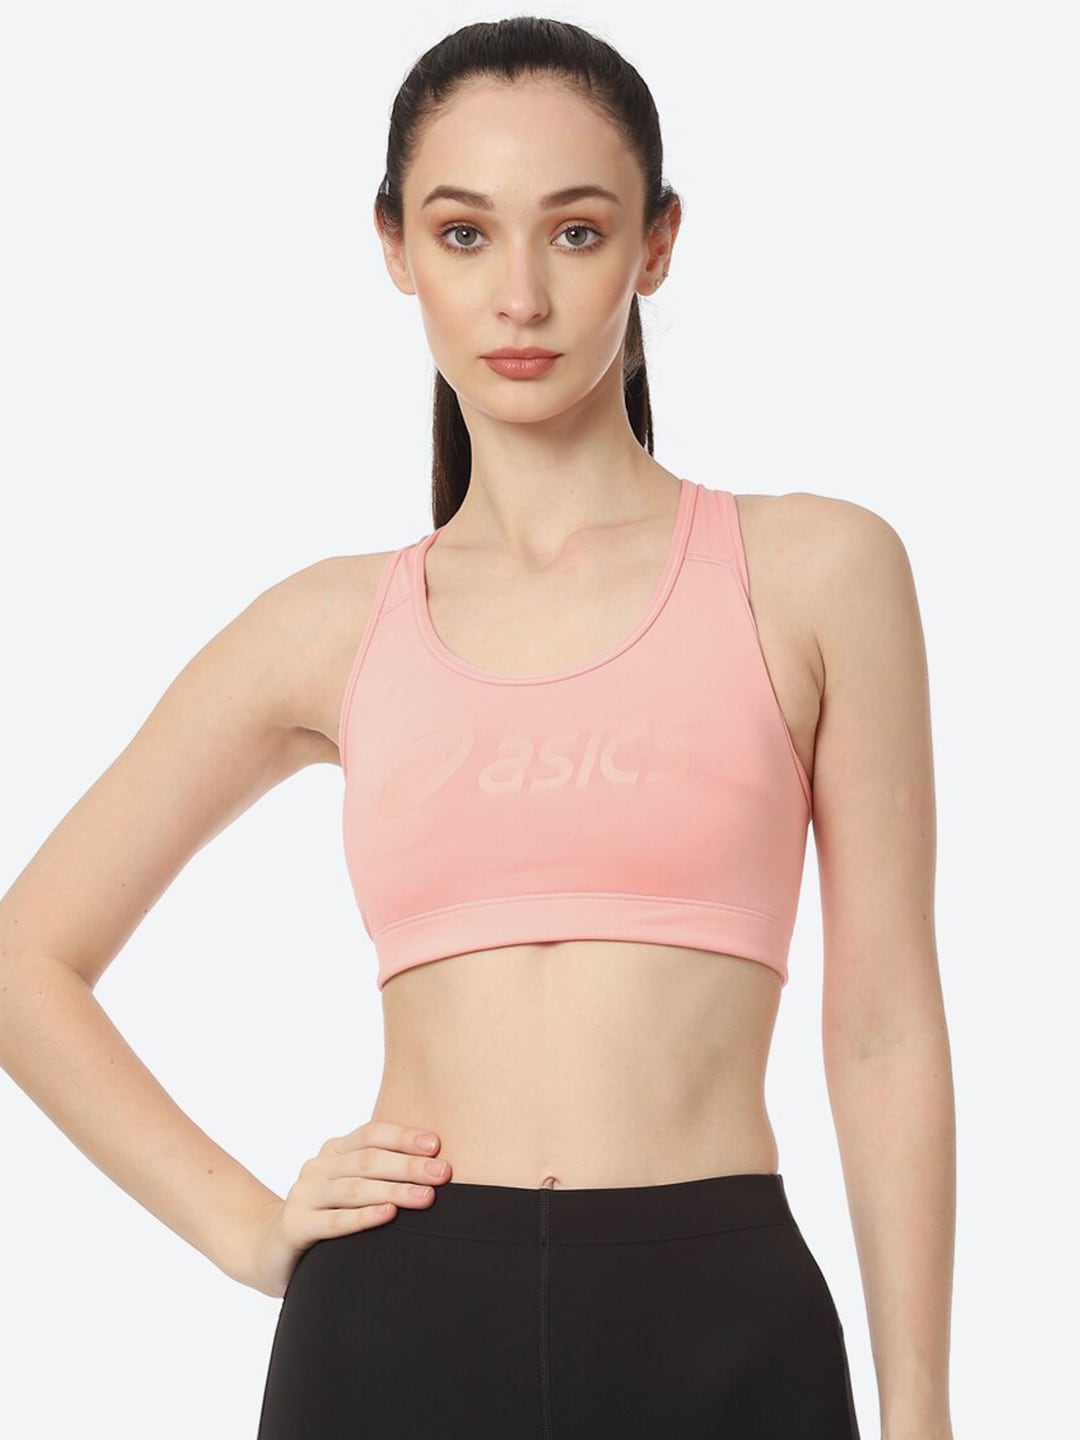 ASICS Womens Pink Sports Non-Wired Bra Price in India